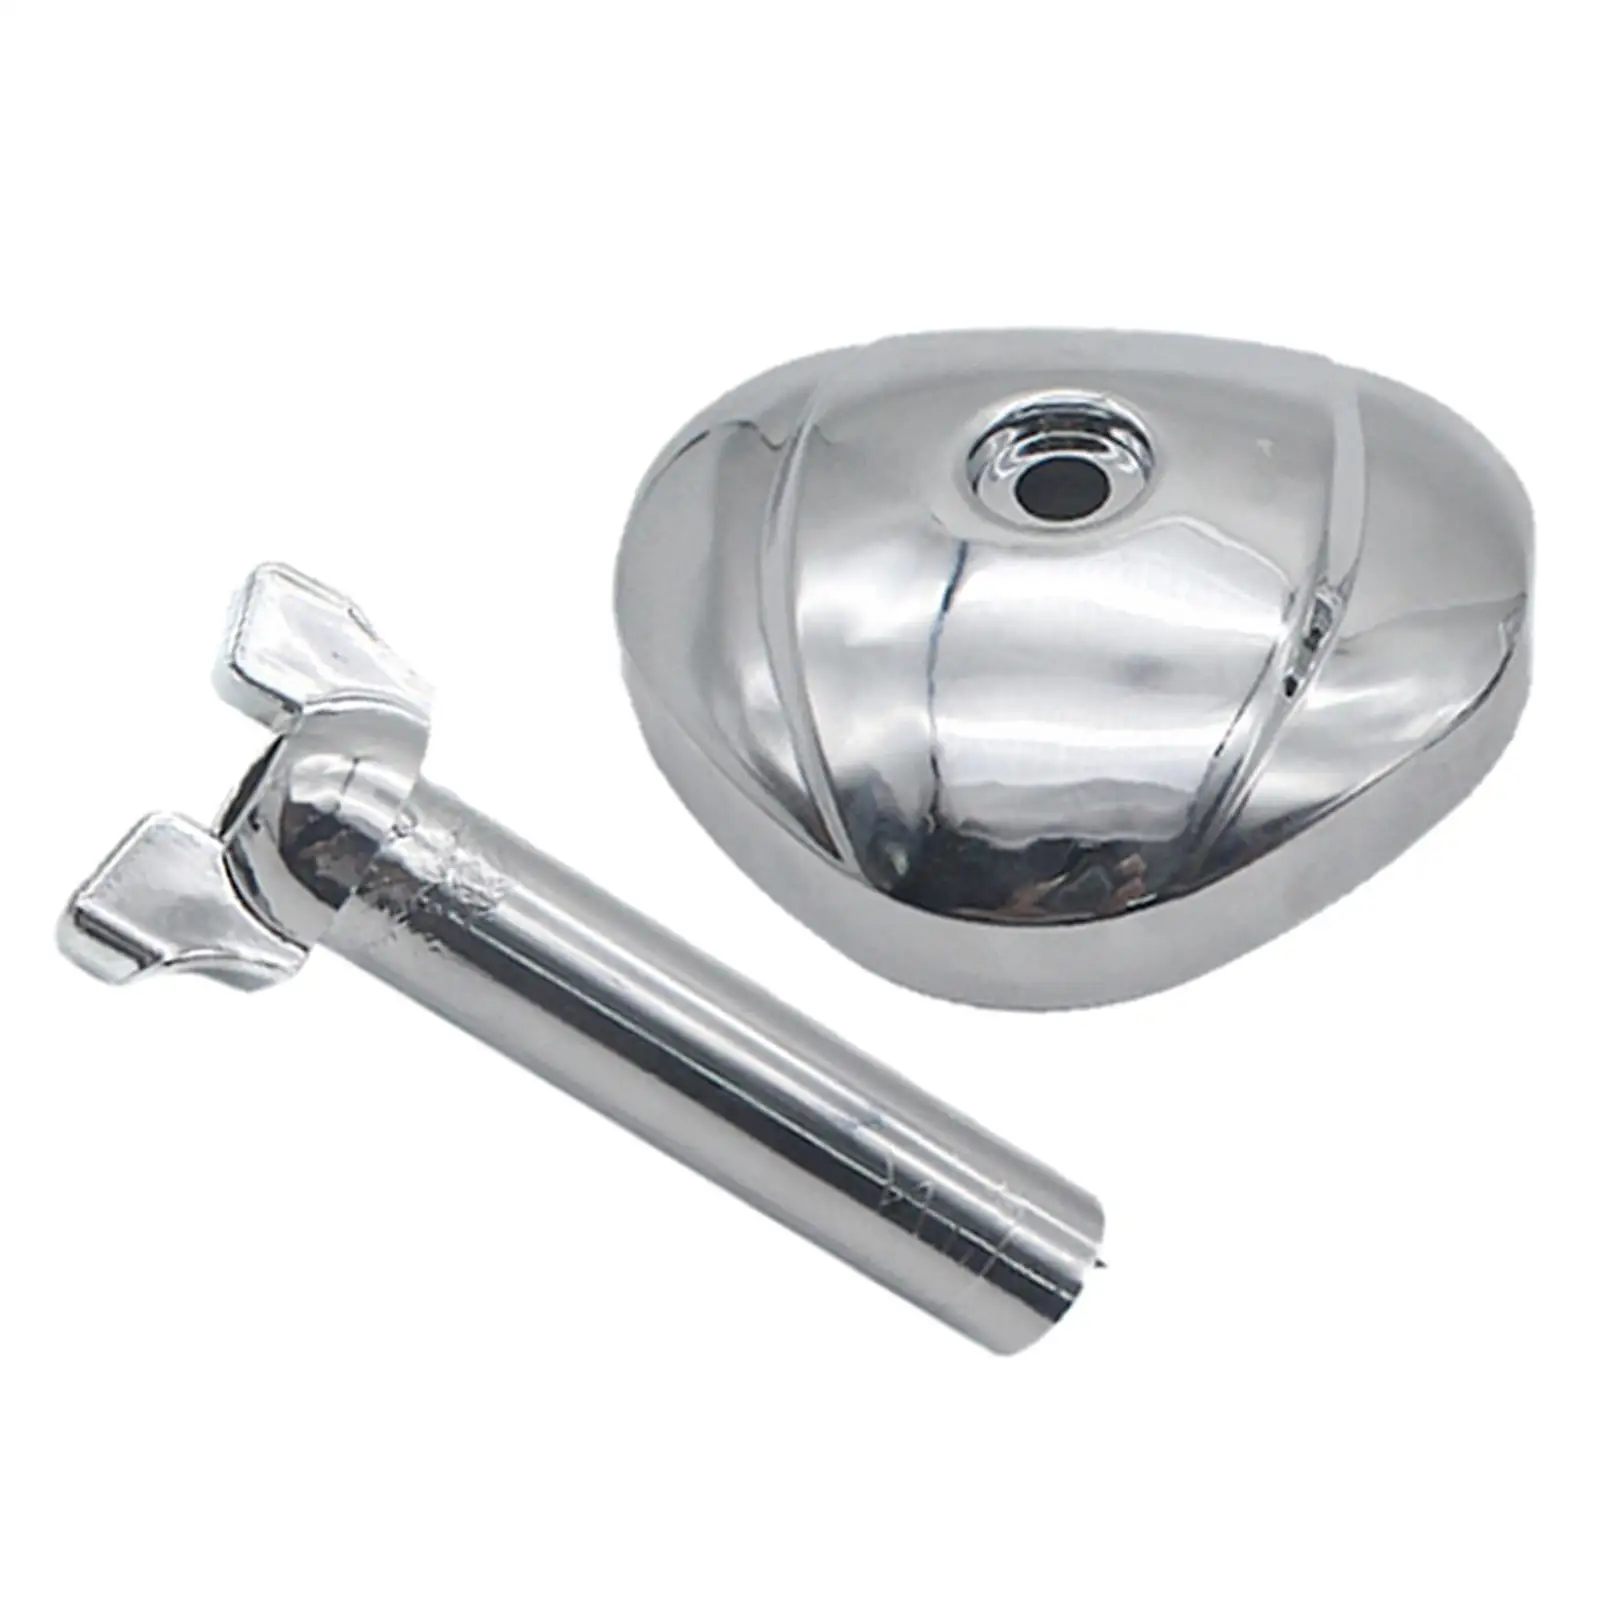  Tank Switch Handle Chrome Carburetor Cover for   400 600